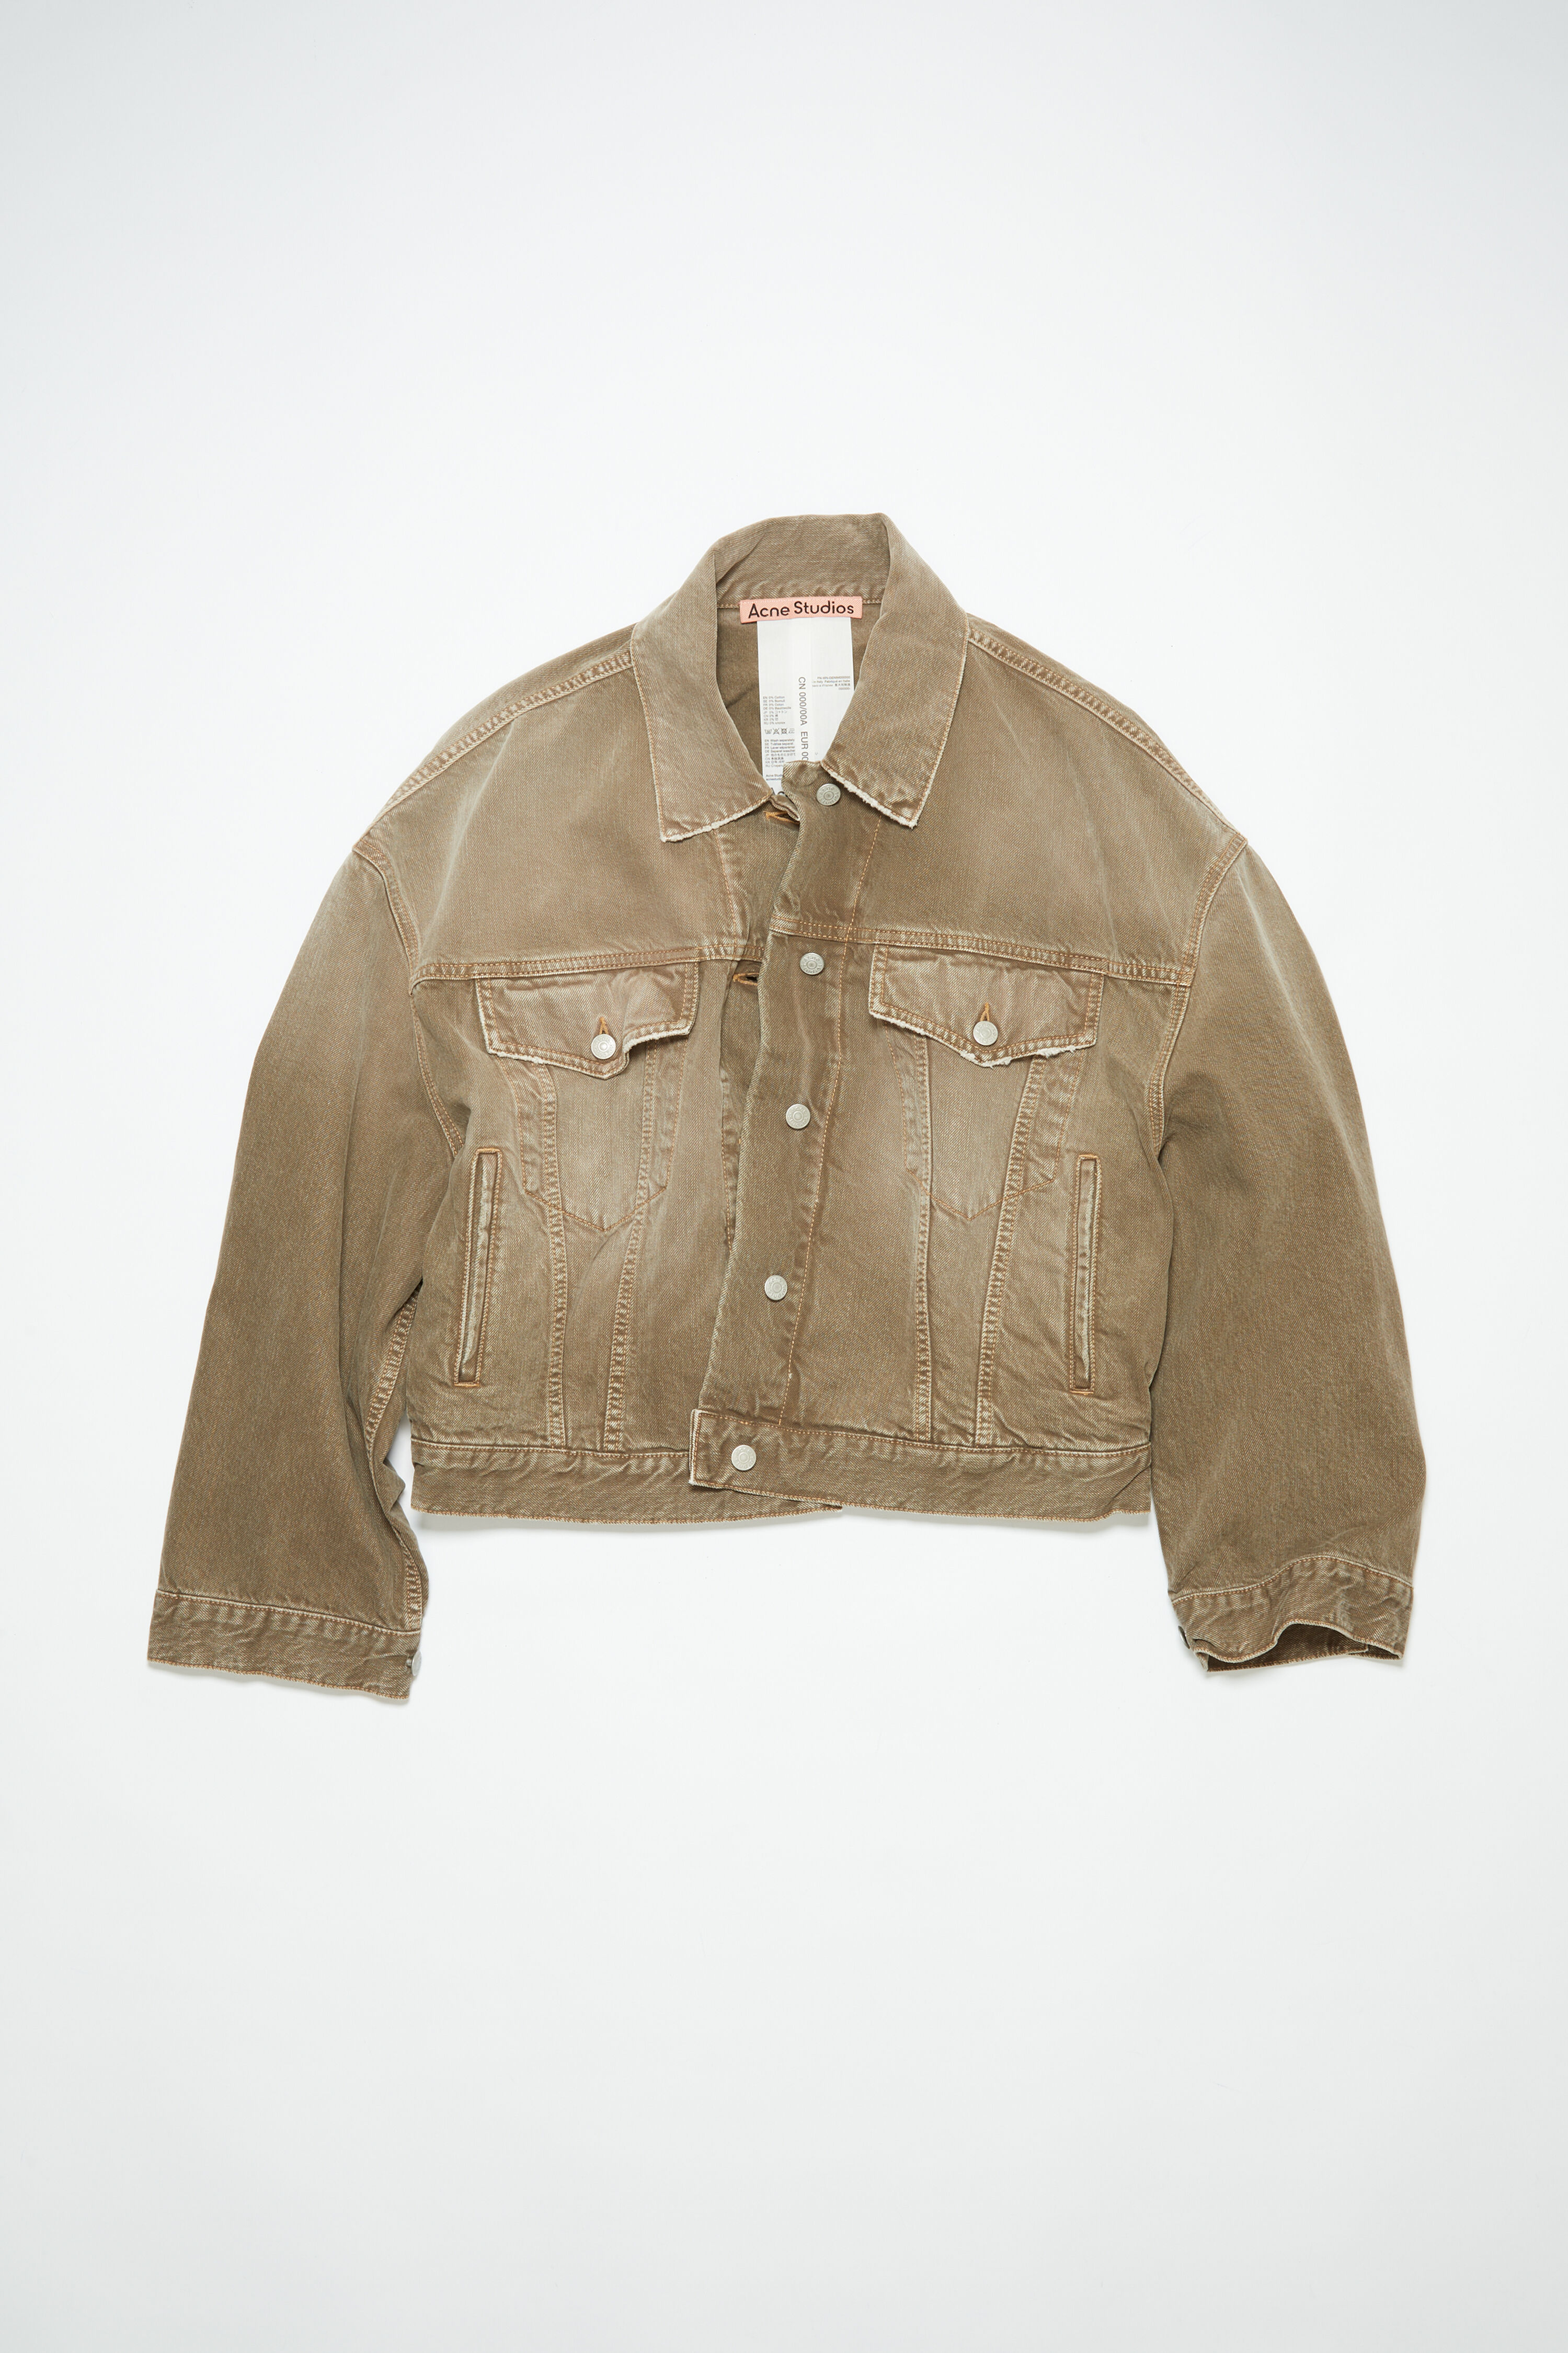 Yellow Dropped Shoulder Denim Jacket by Acne Studios on Sale